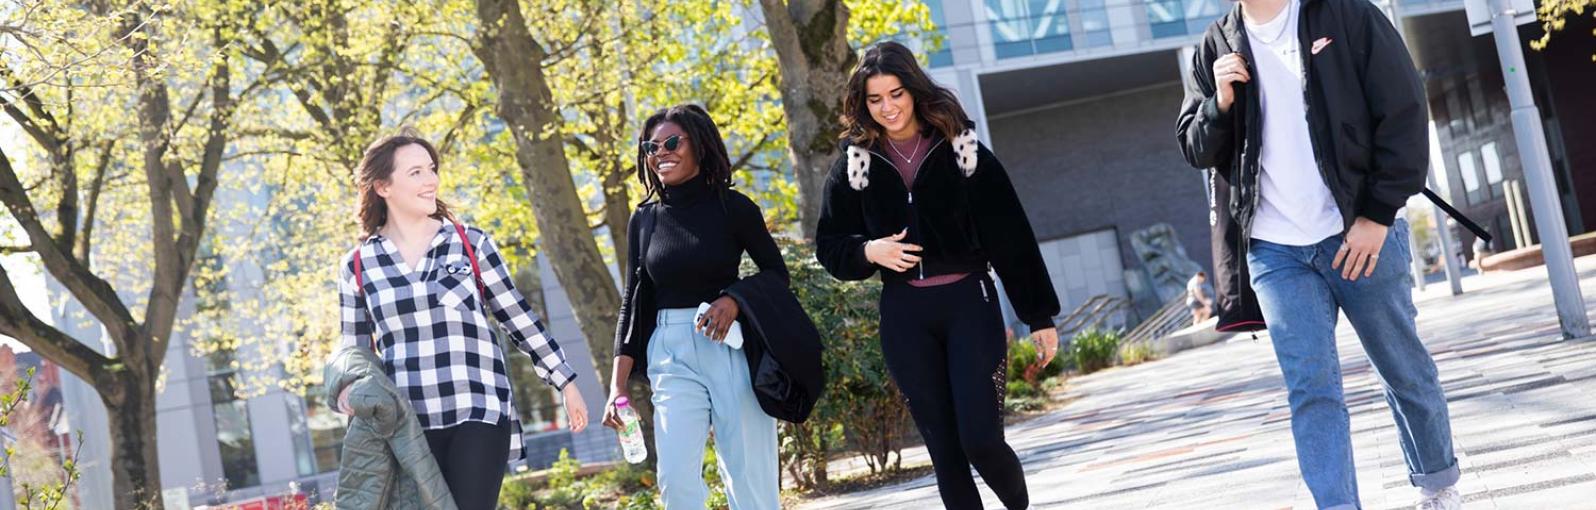 Three female and one male students walking outside through campus